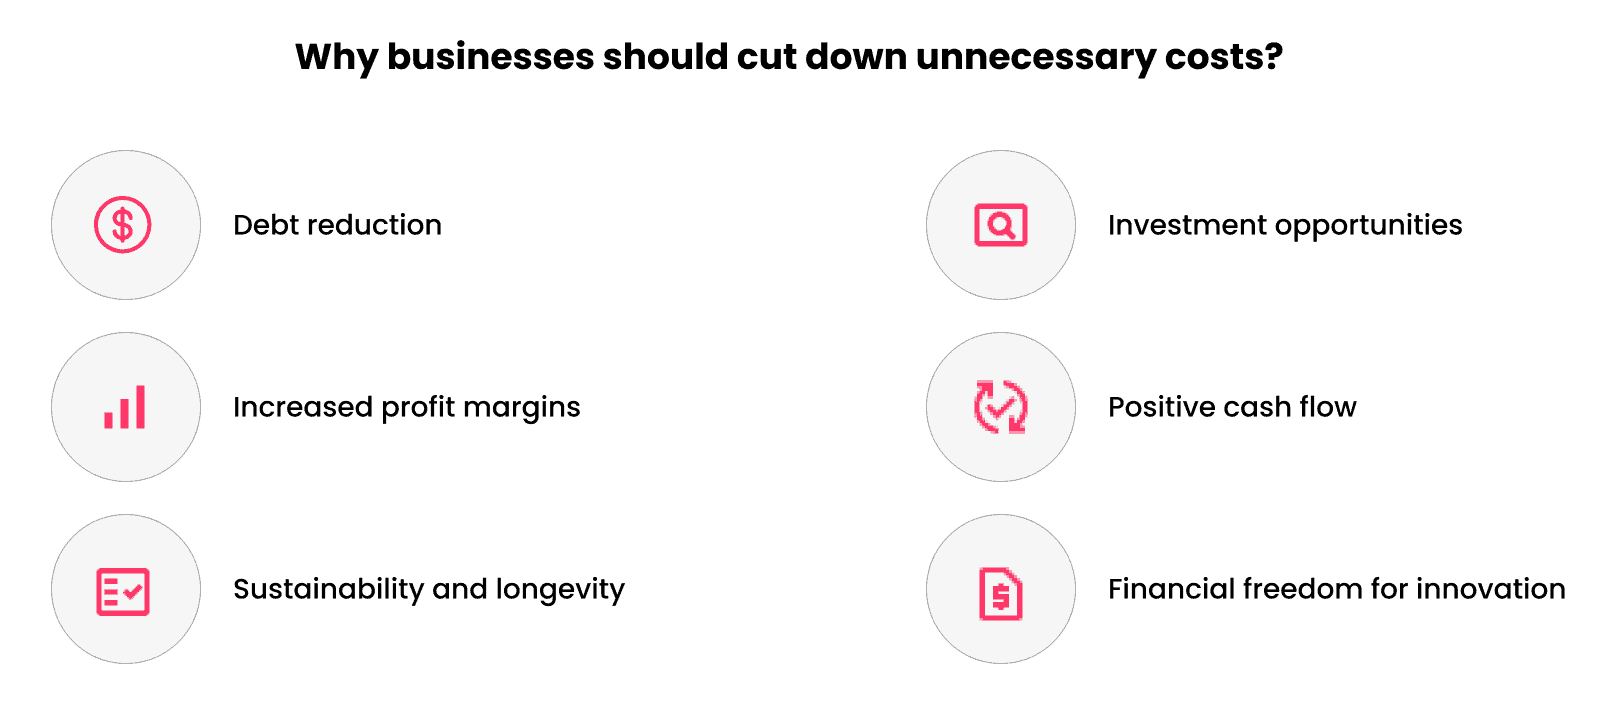 Why businesses should cut down unnecessary costs